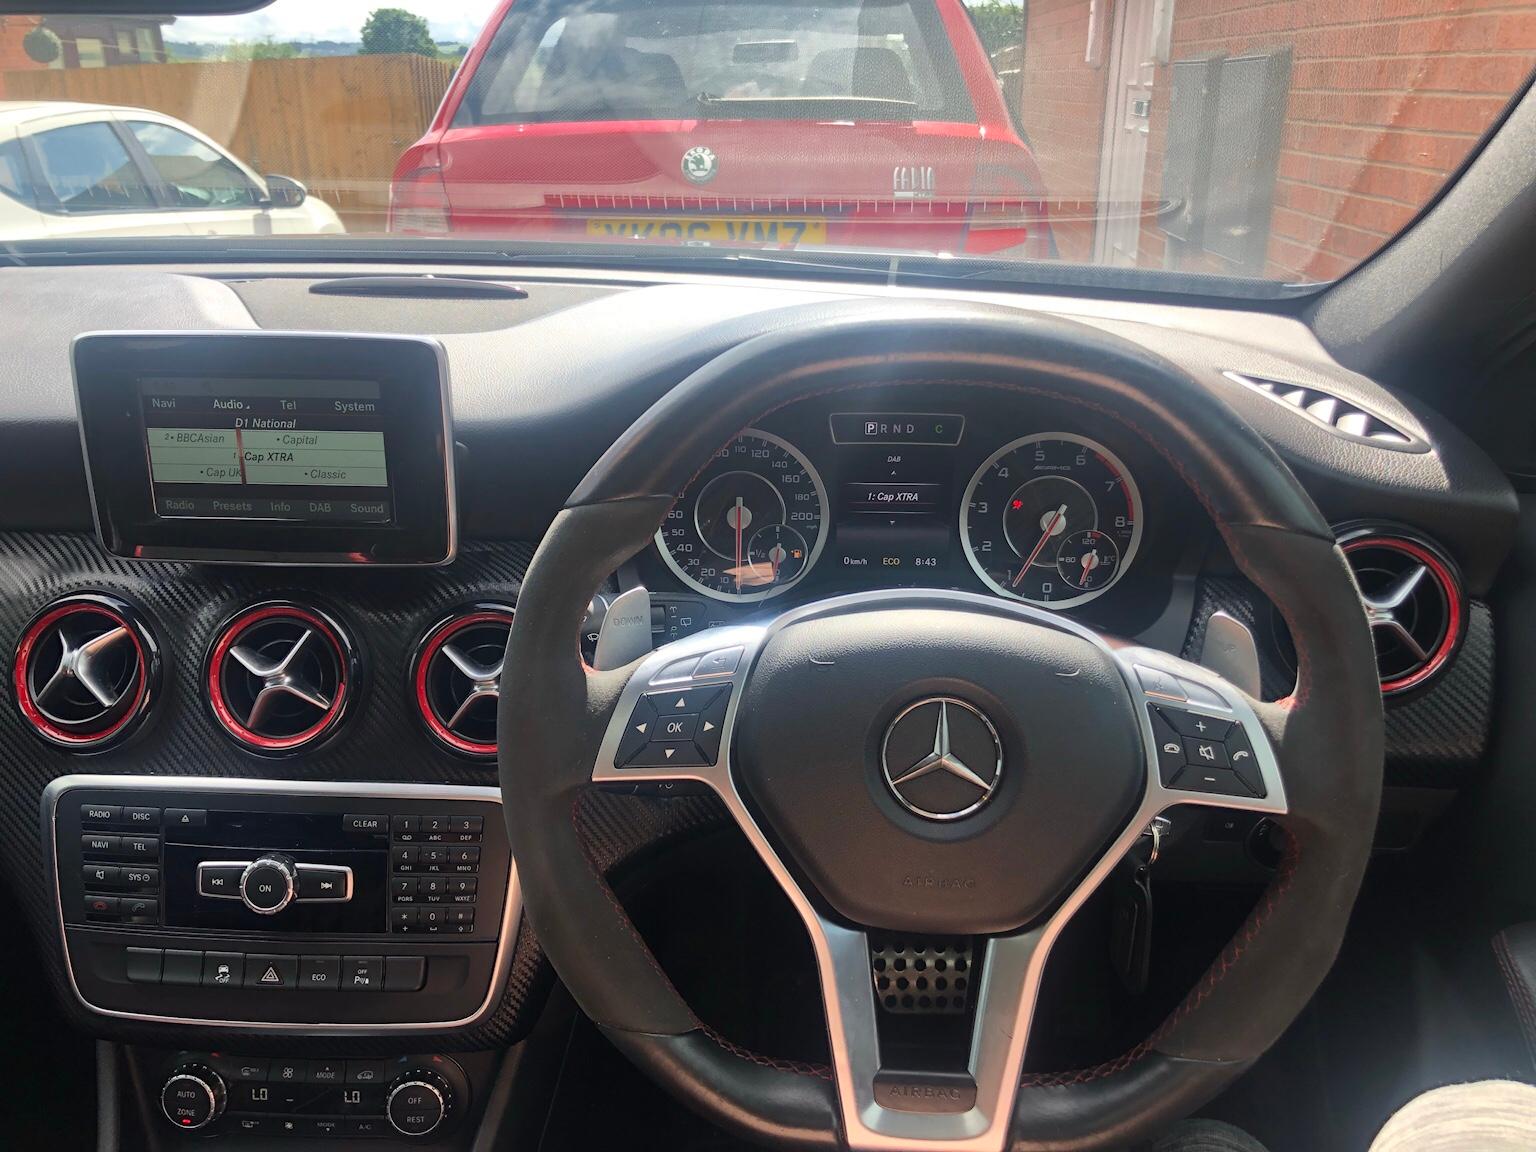 Mercedes Amg A45 2 0 4matic Dsg In Ls27 Leeds For 20 995 00